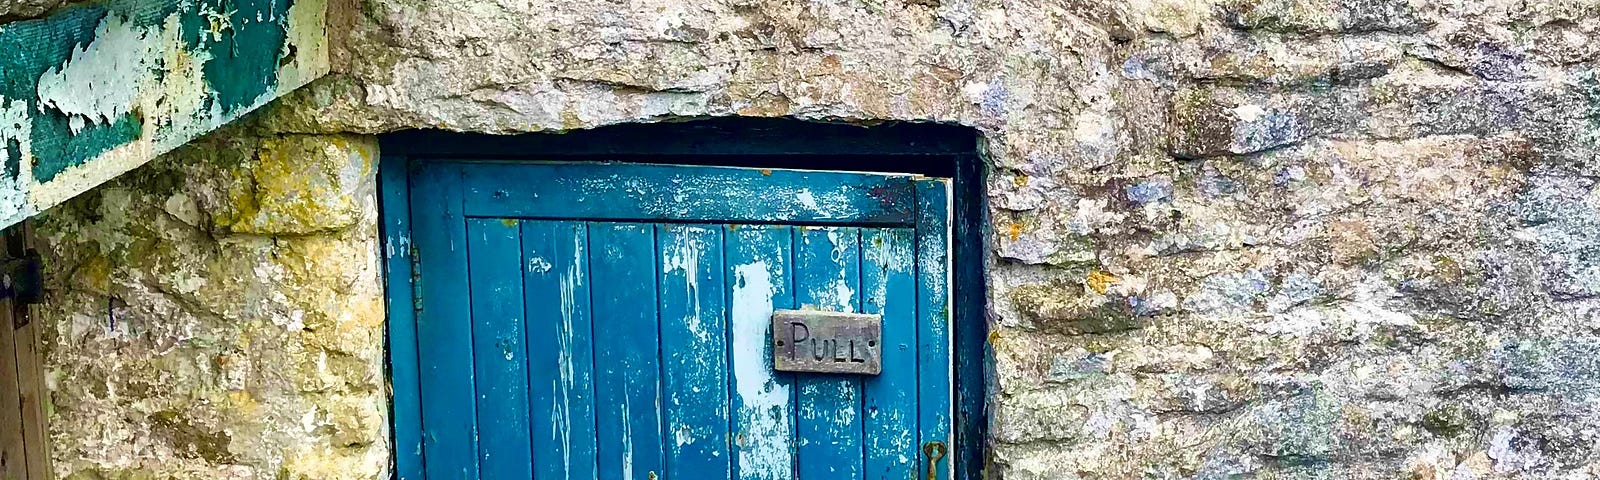 A small door nestled within a stone wall. There is a small sign which reads: “Pull”.